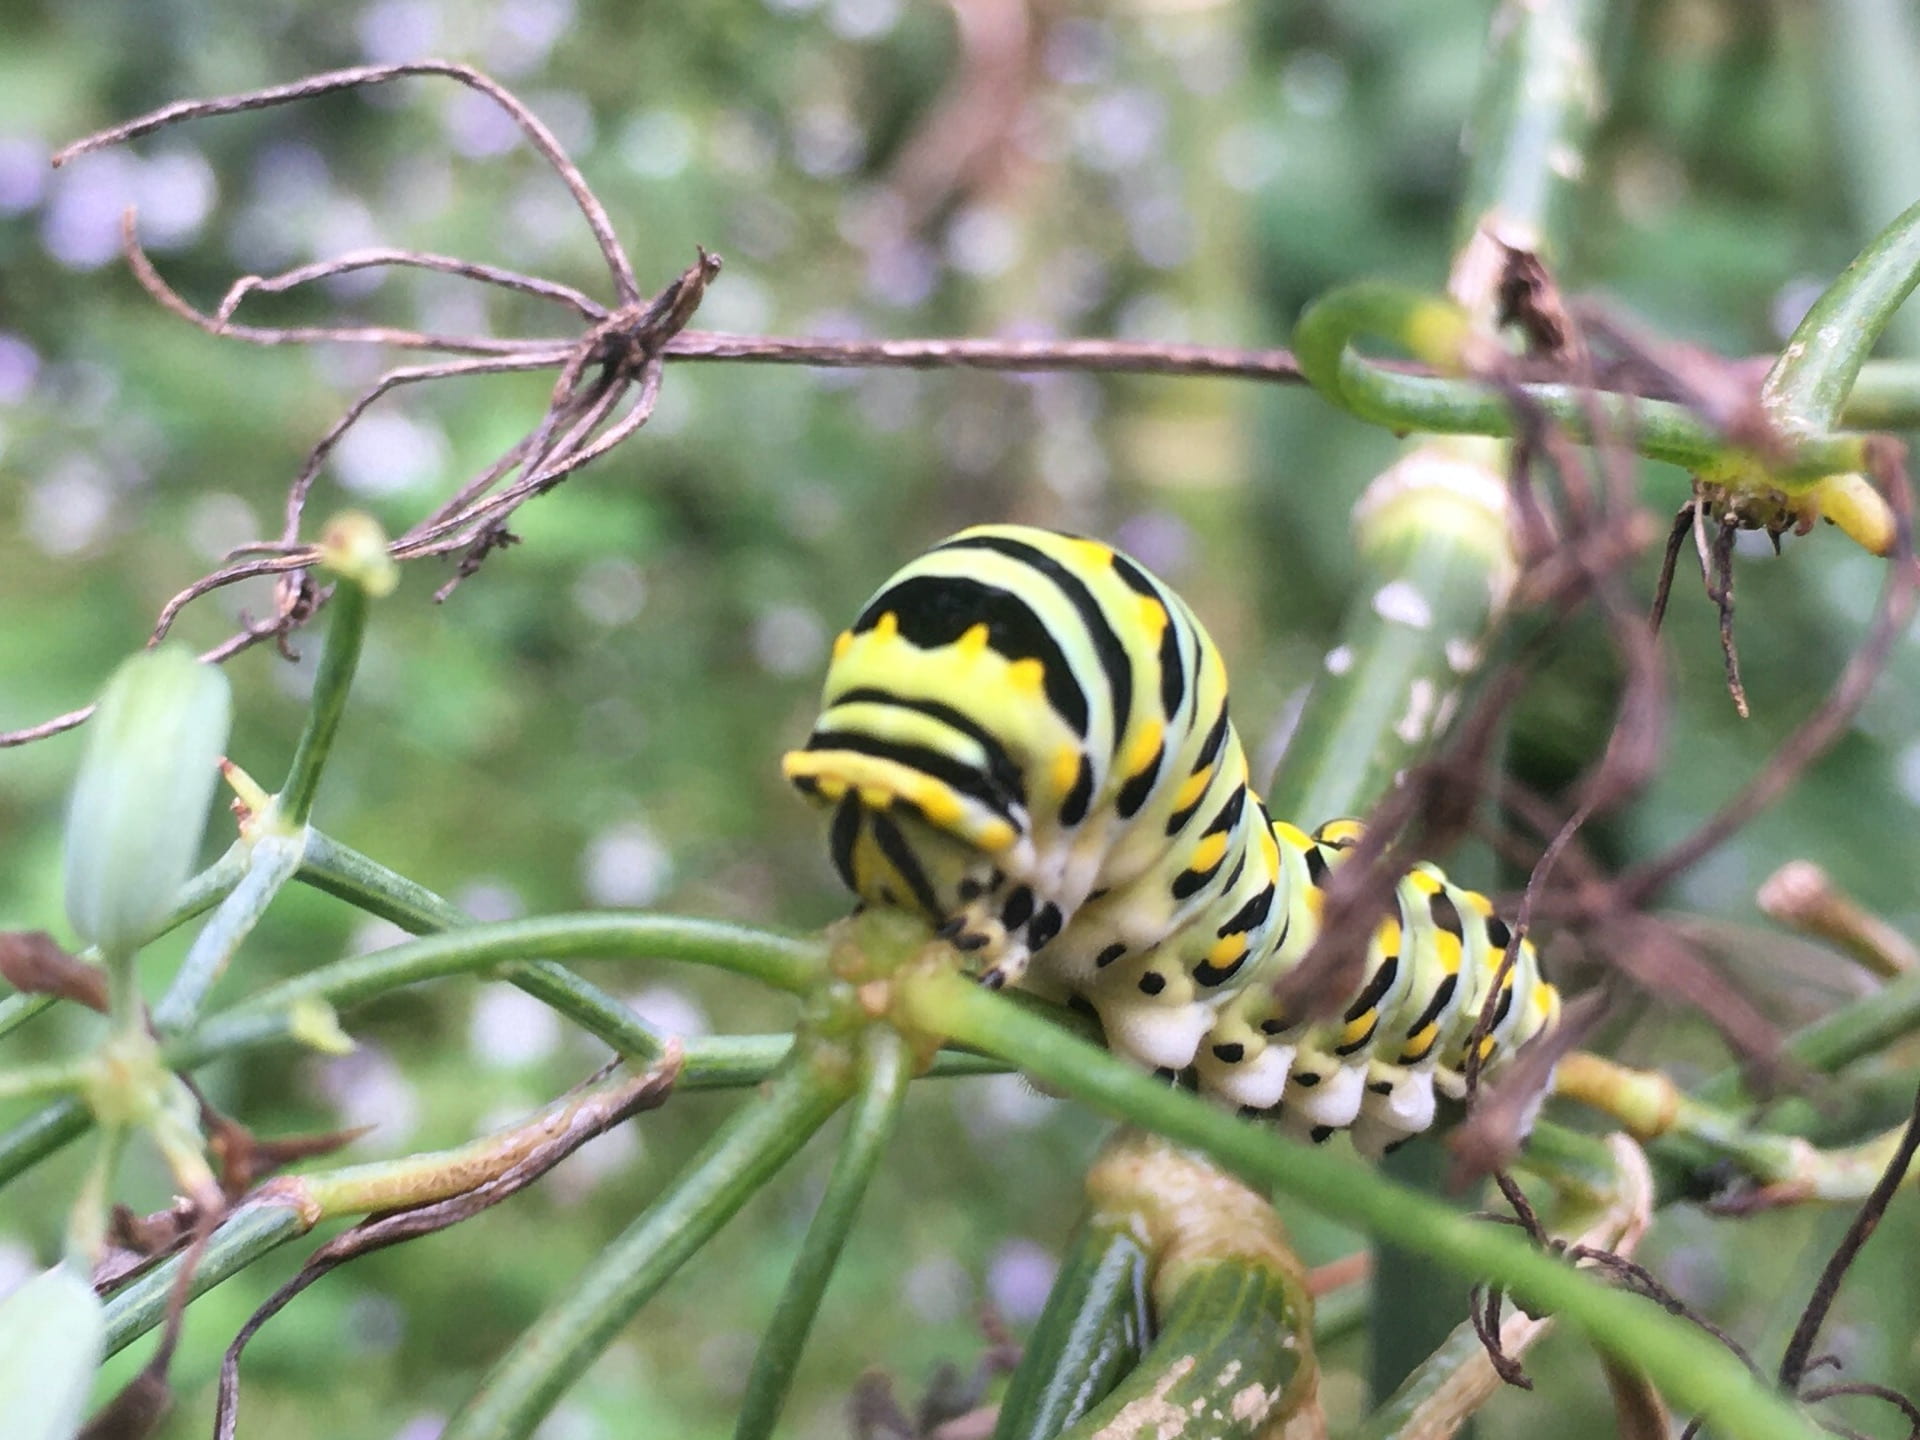 An eastern black swallowtail caterpillar, Papilio polyxenes, munches on fennel stems.